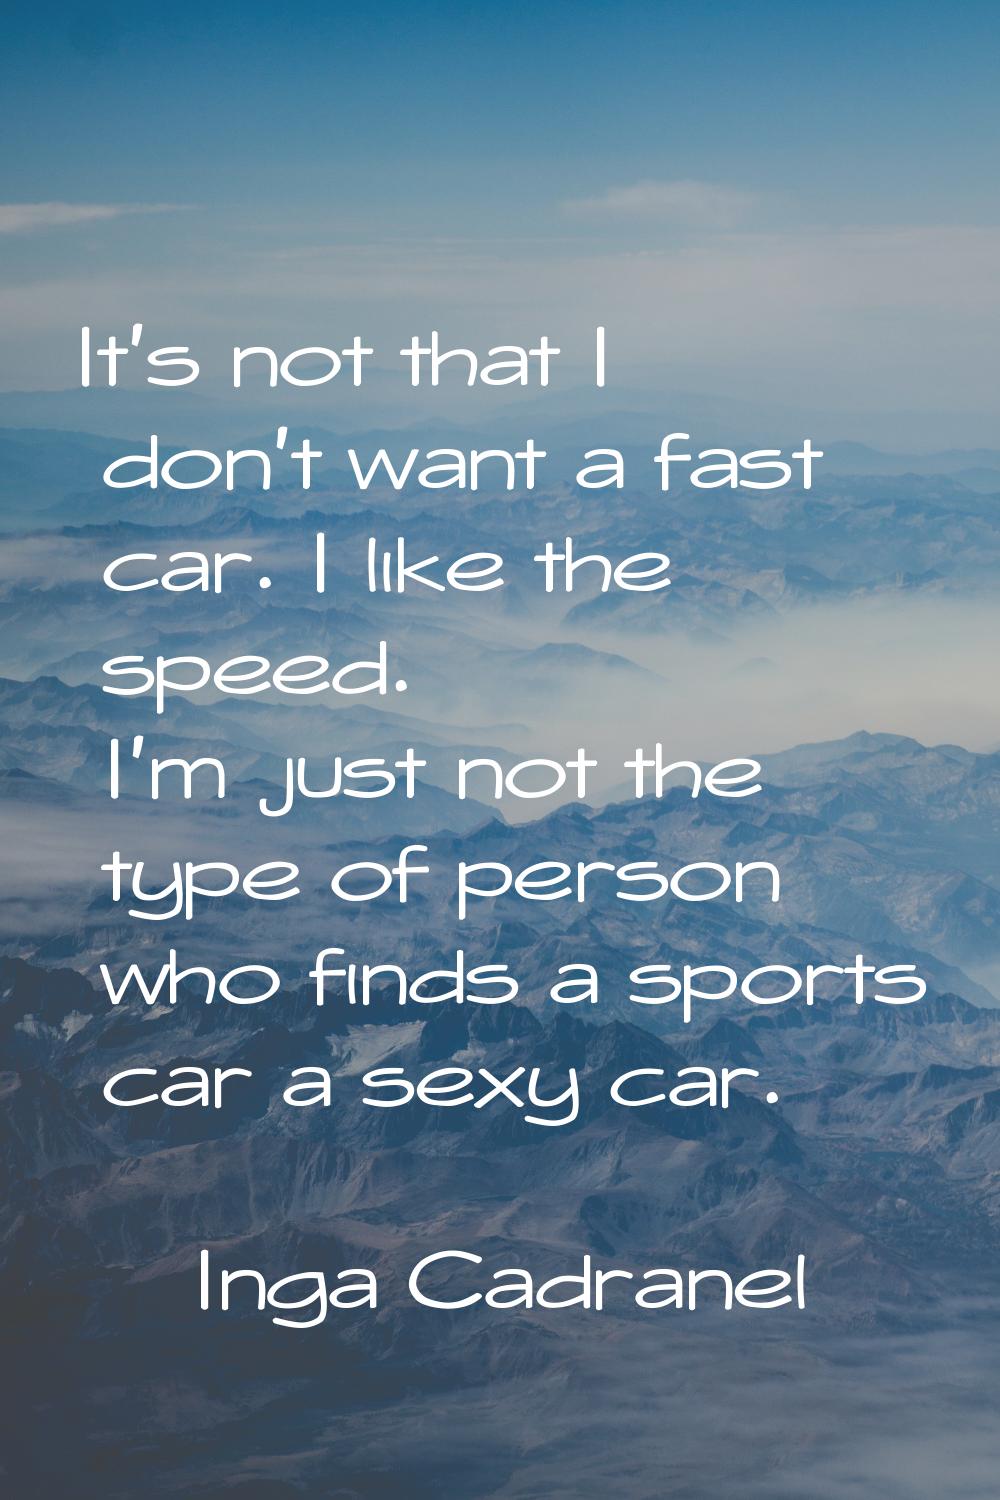 It's not that I don't want a fast car. I like the speed. I'm just not the type of person who finds 